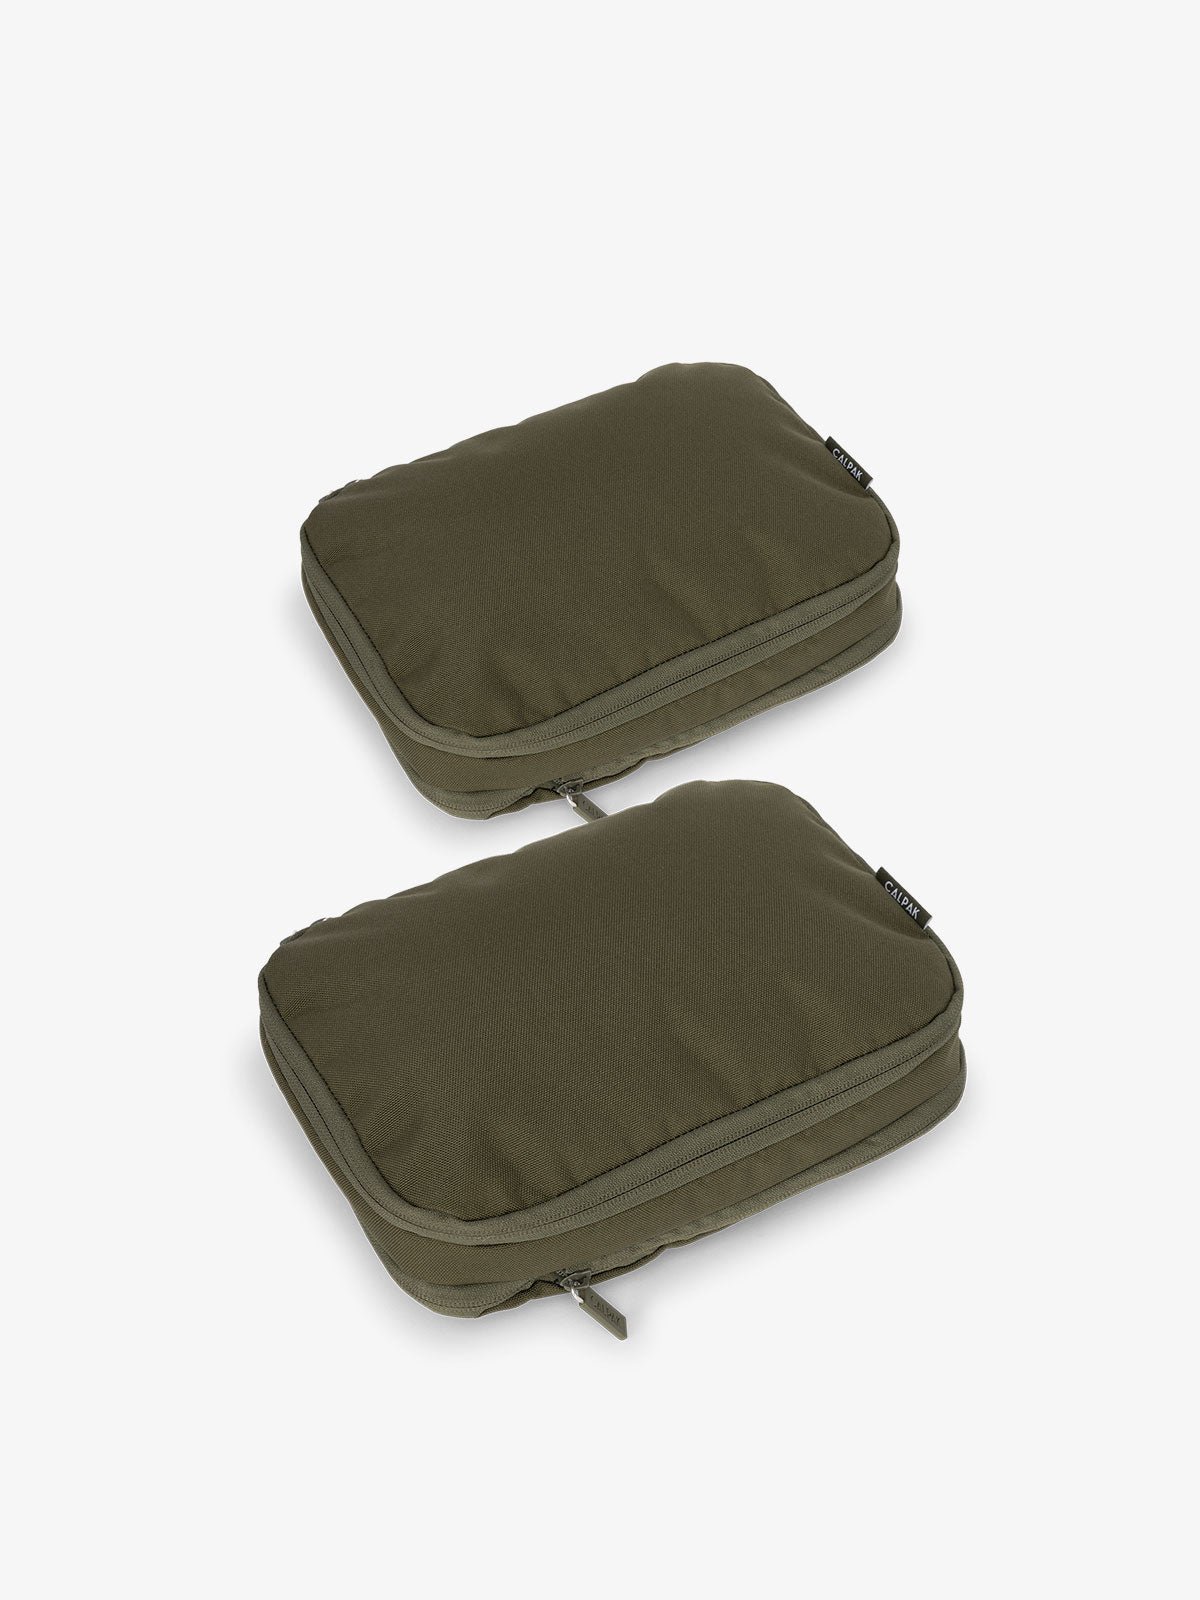 CALPAK small compression packing cubes in moss